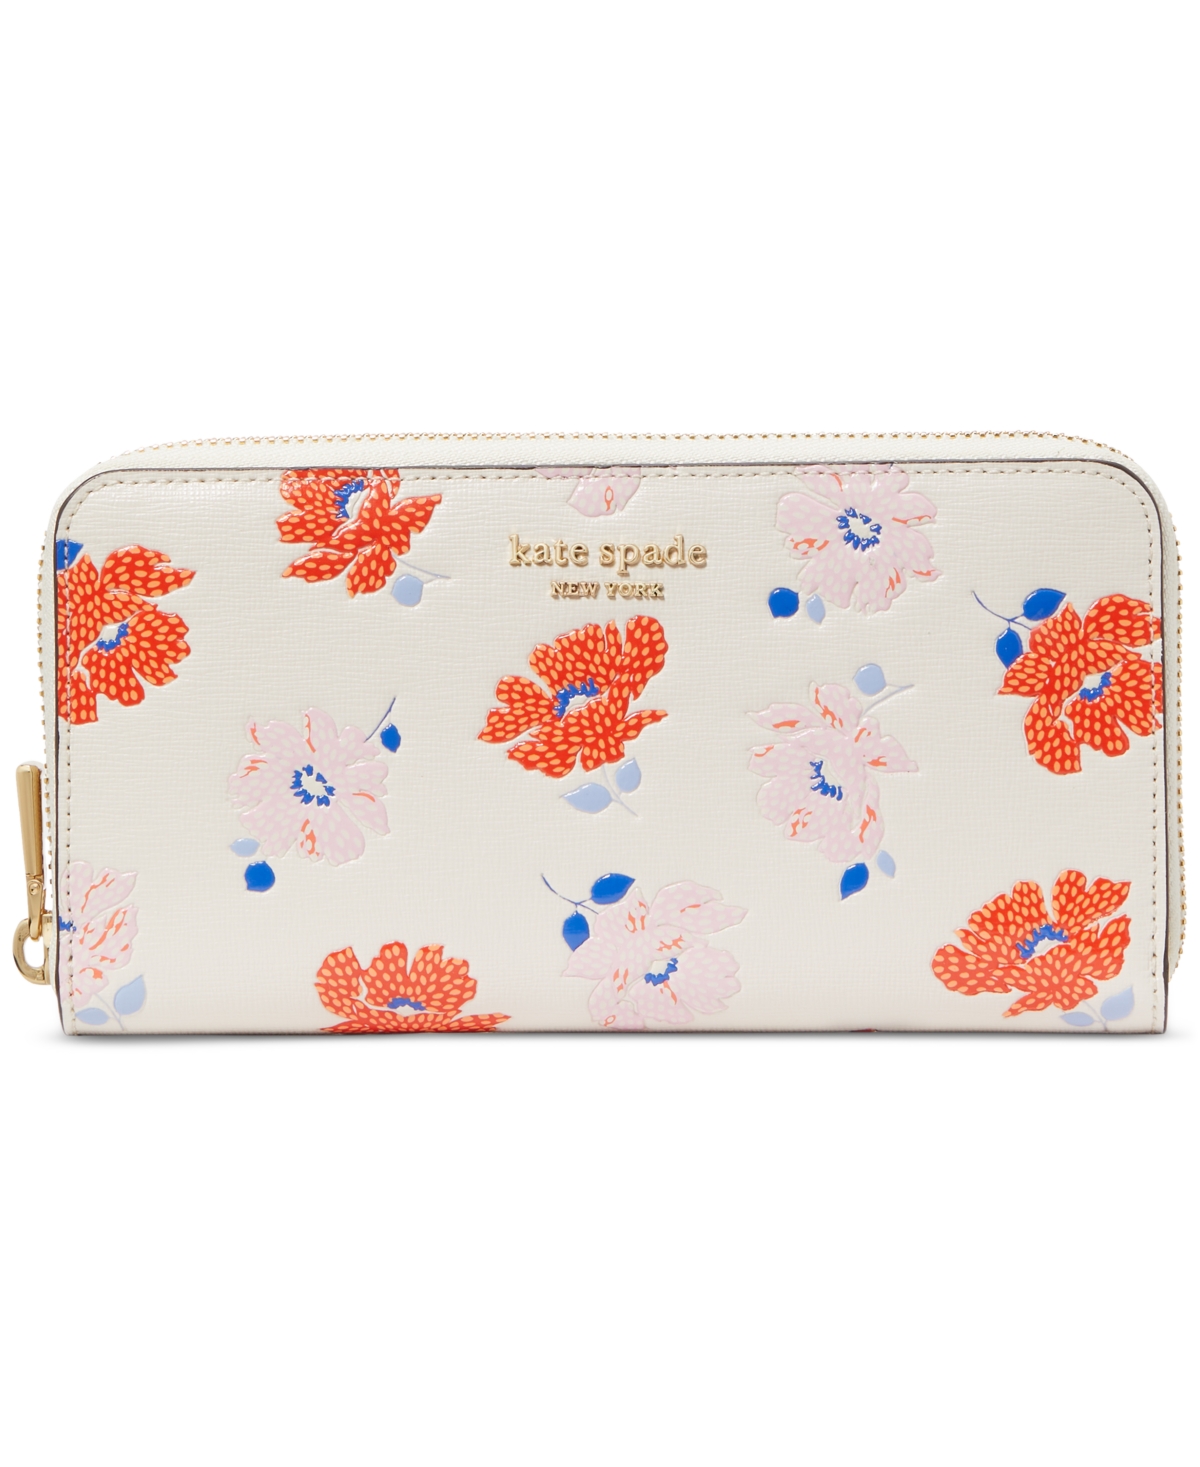 Morgan Dotty Floral Embossed Saffiano Leather Zip Around Continental Wallet - White Multi